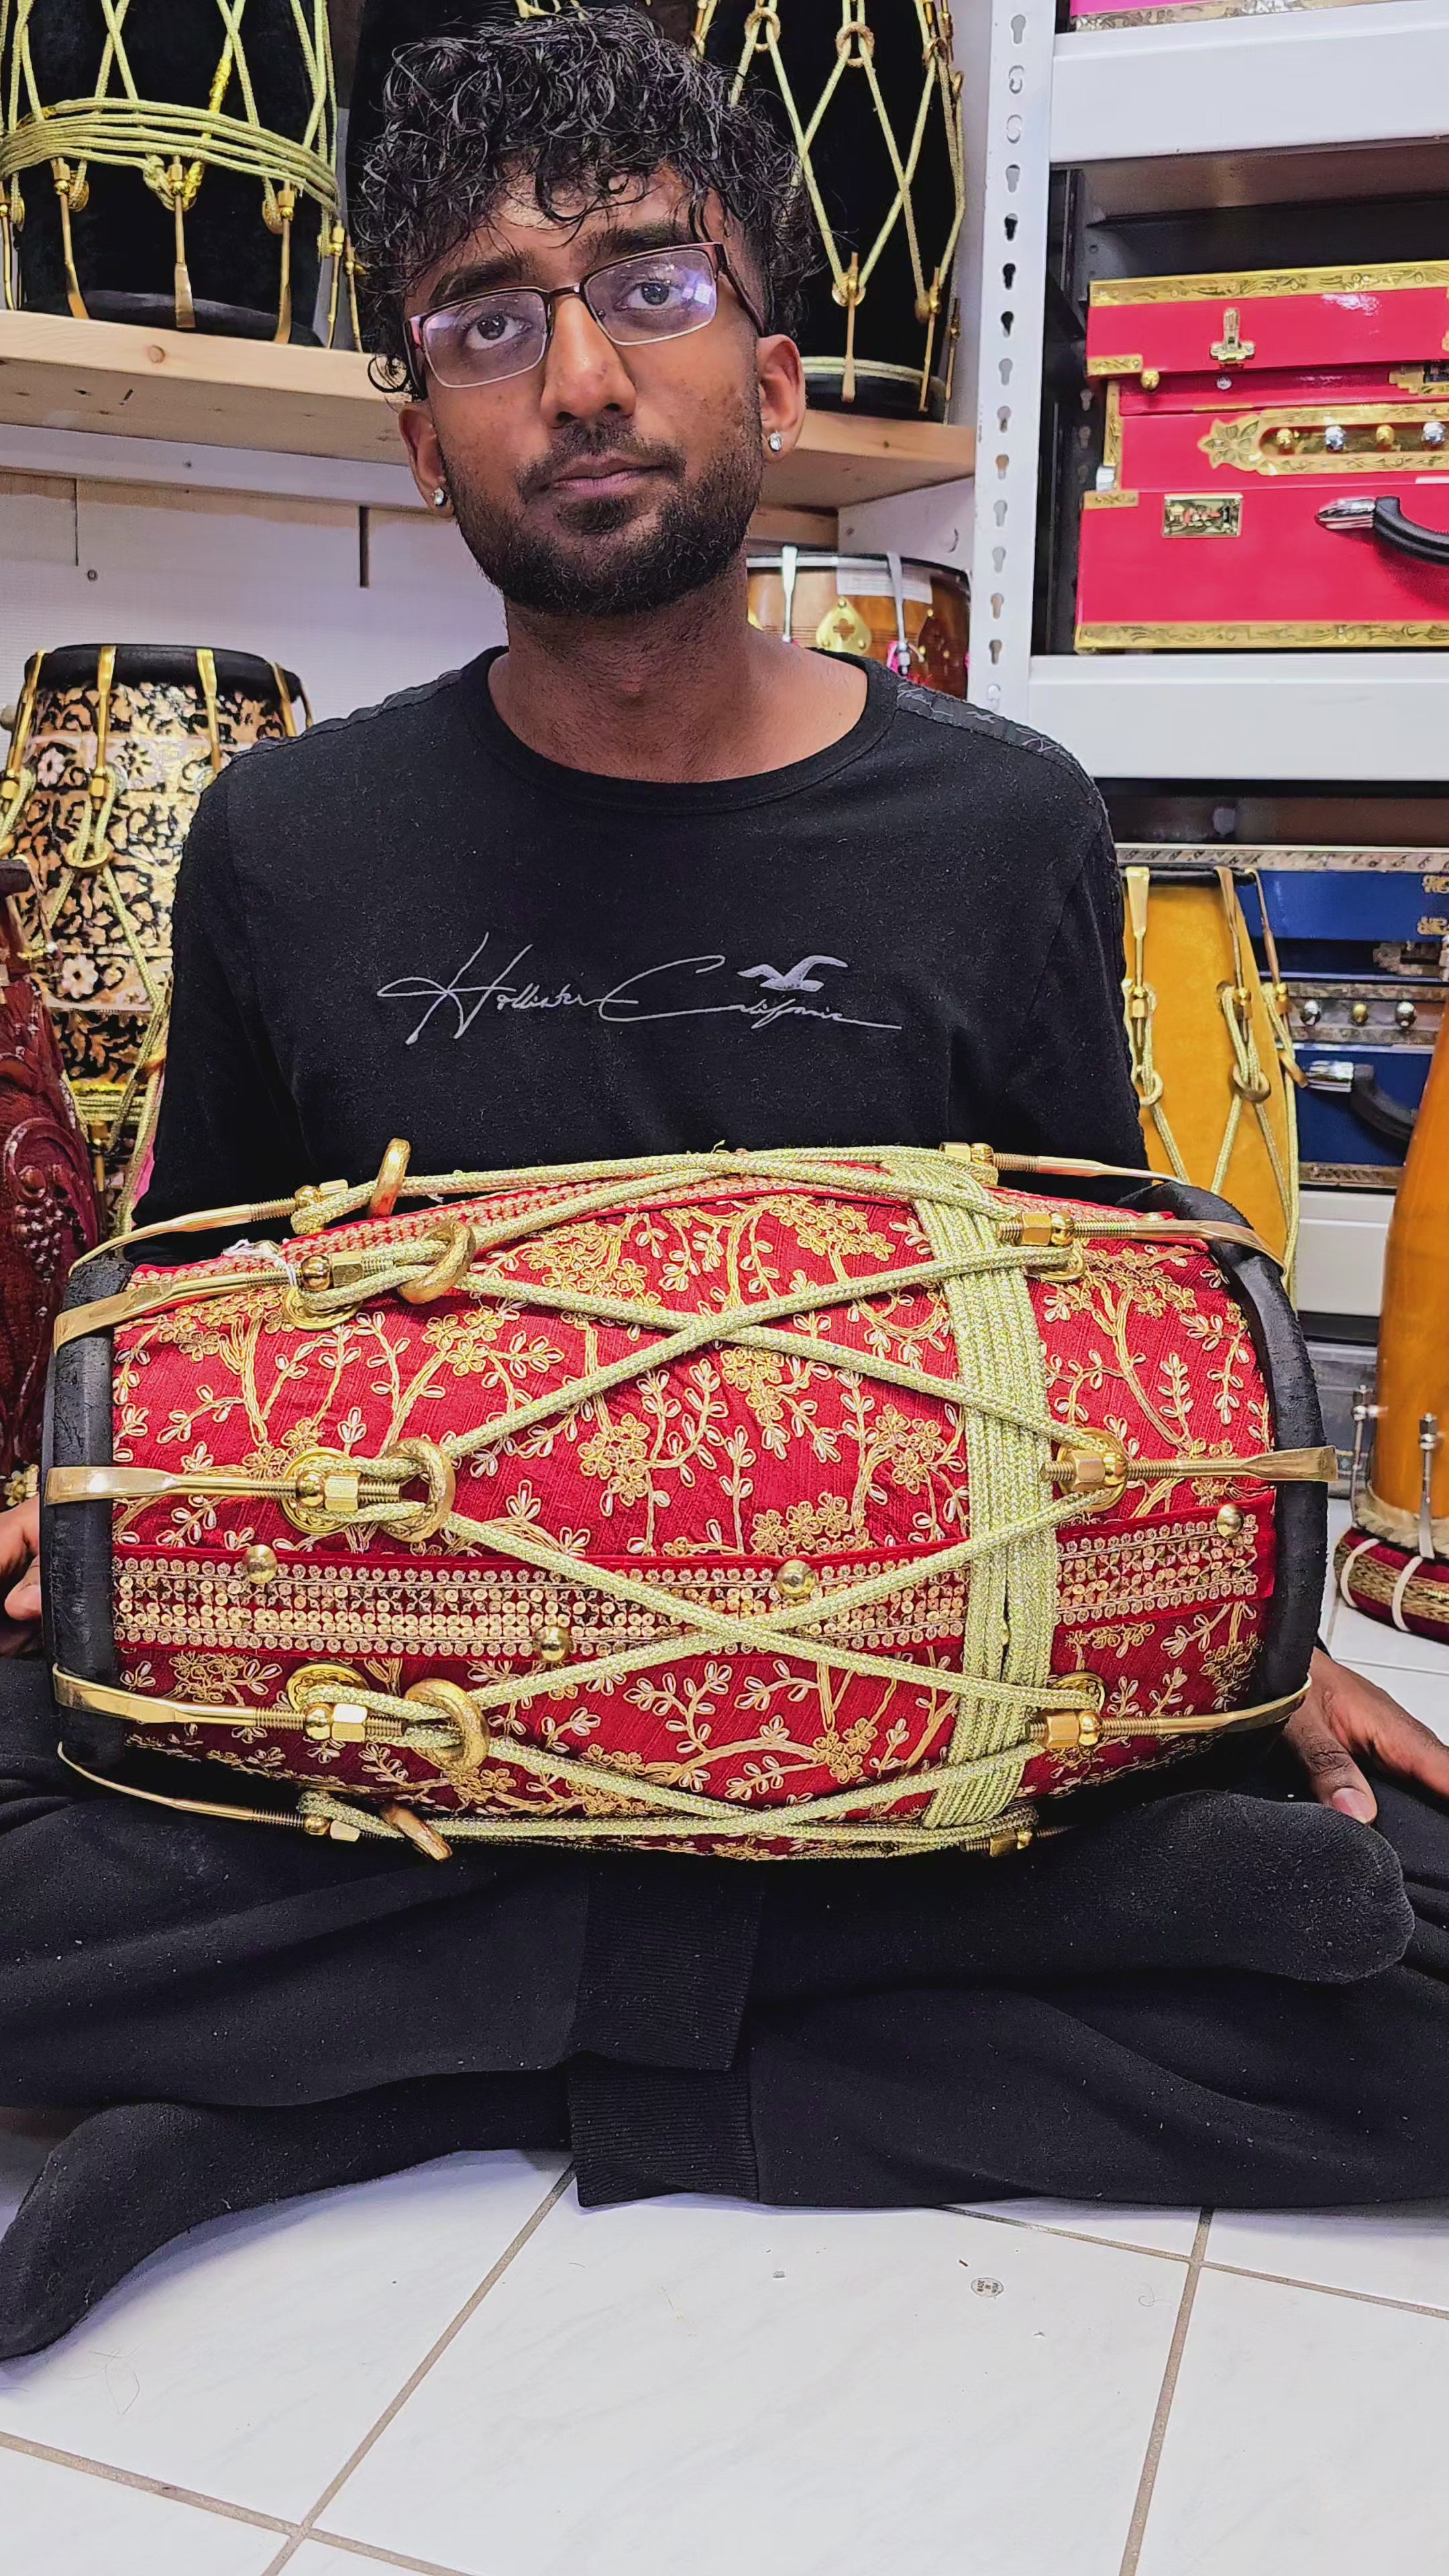 Regal Elegance: Red & Gold Sherwani Wrapped Red Sheesham Dholak with Golden Brass Bolts and Ropes, Black Pudis (BLACK FRIDAY SALE!)